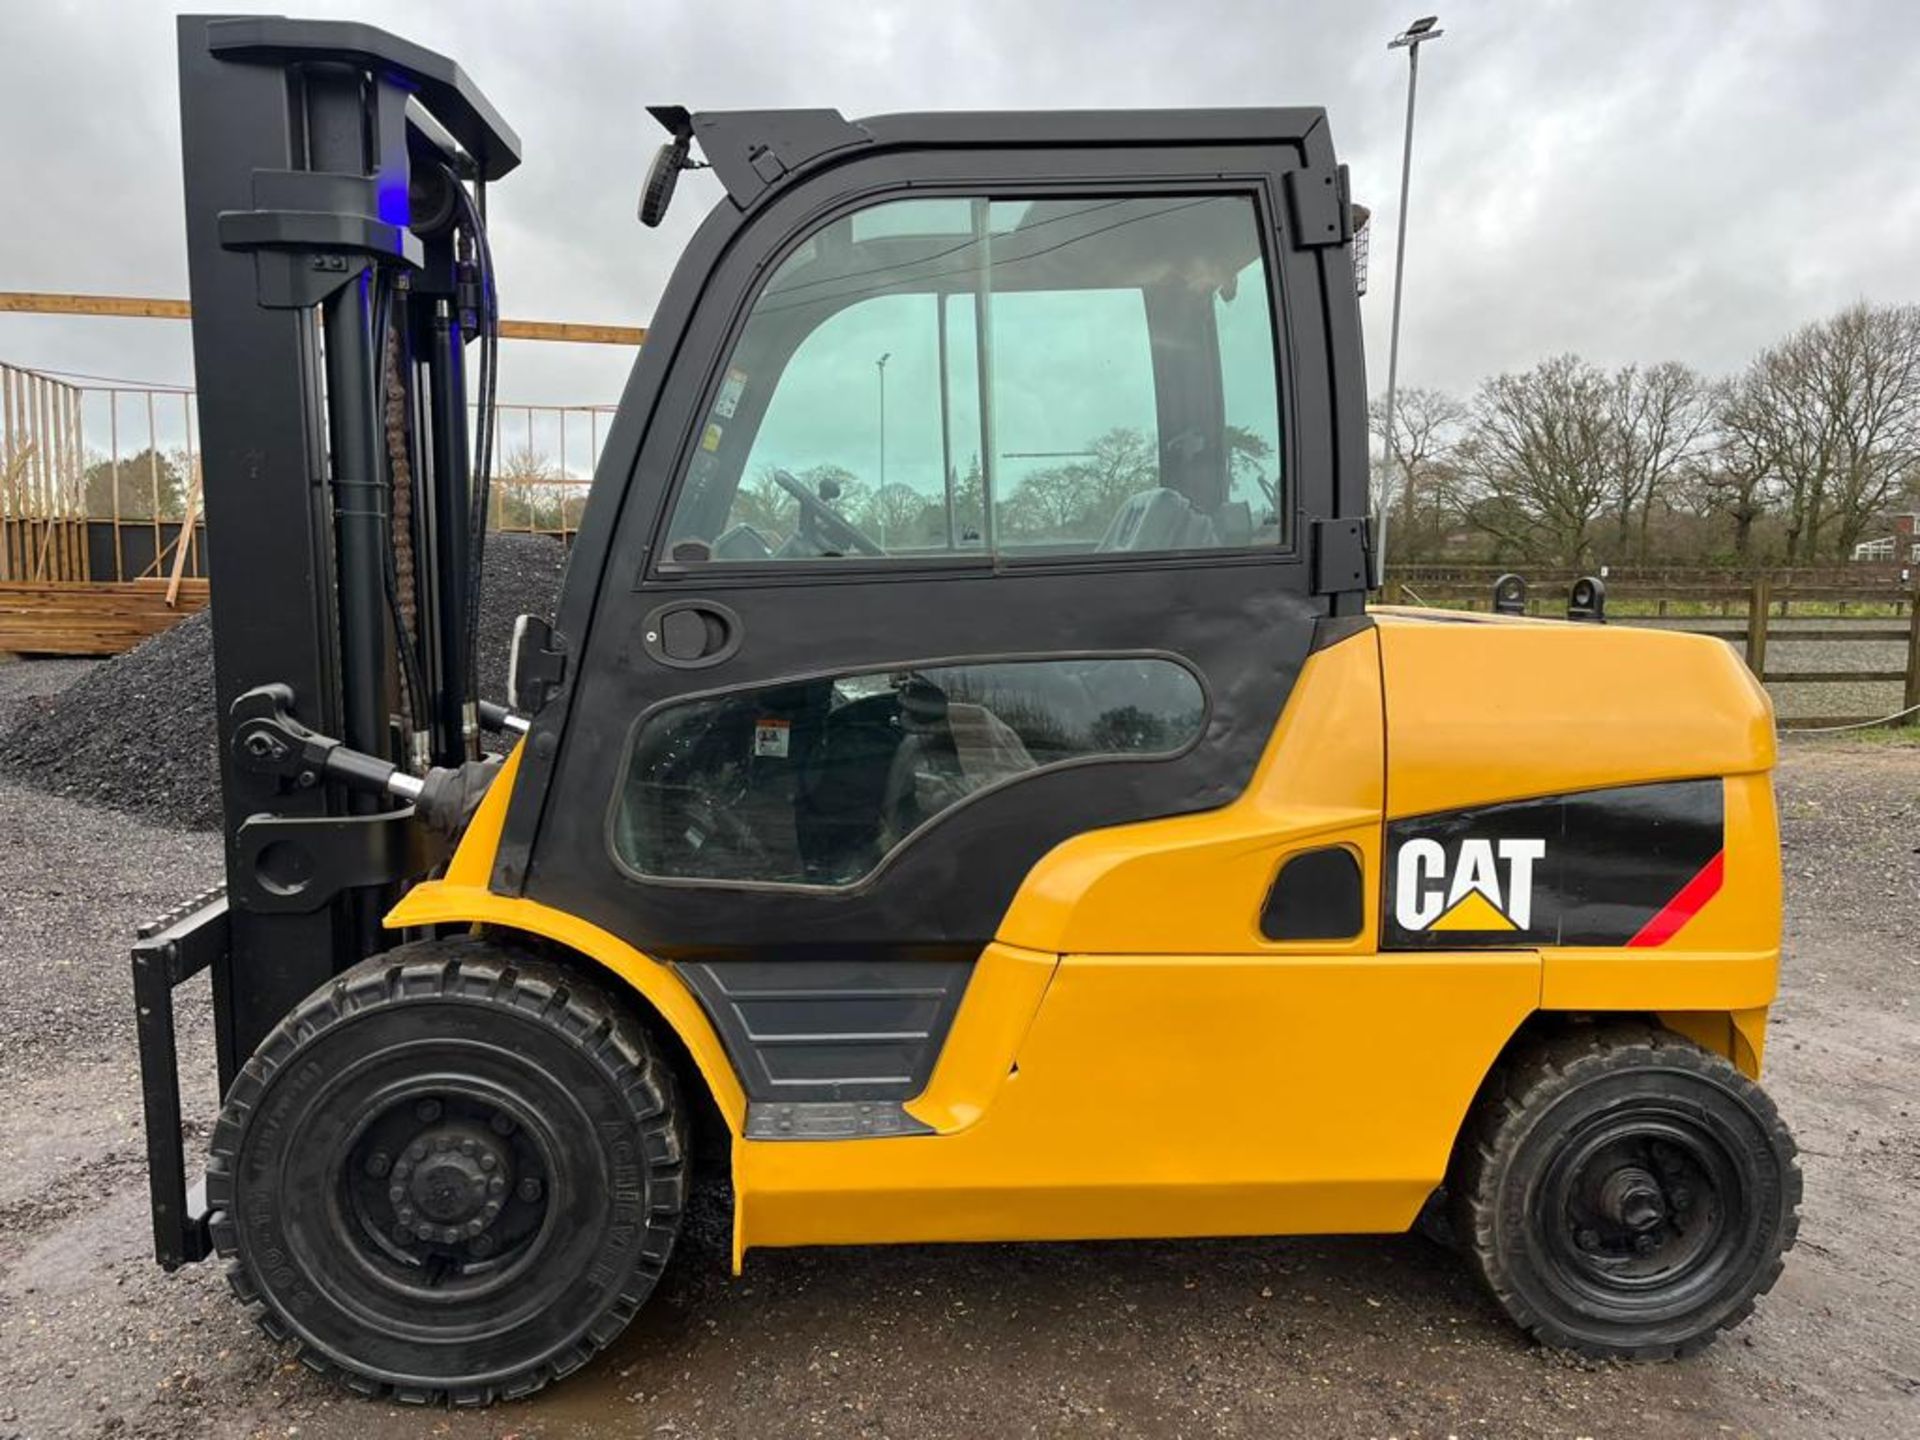 2013 - CATERPILLAR, 5 Tonne Diesel Forklift (New Front Tyres) - Image 3 of 10